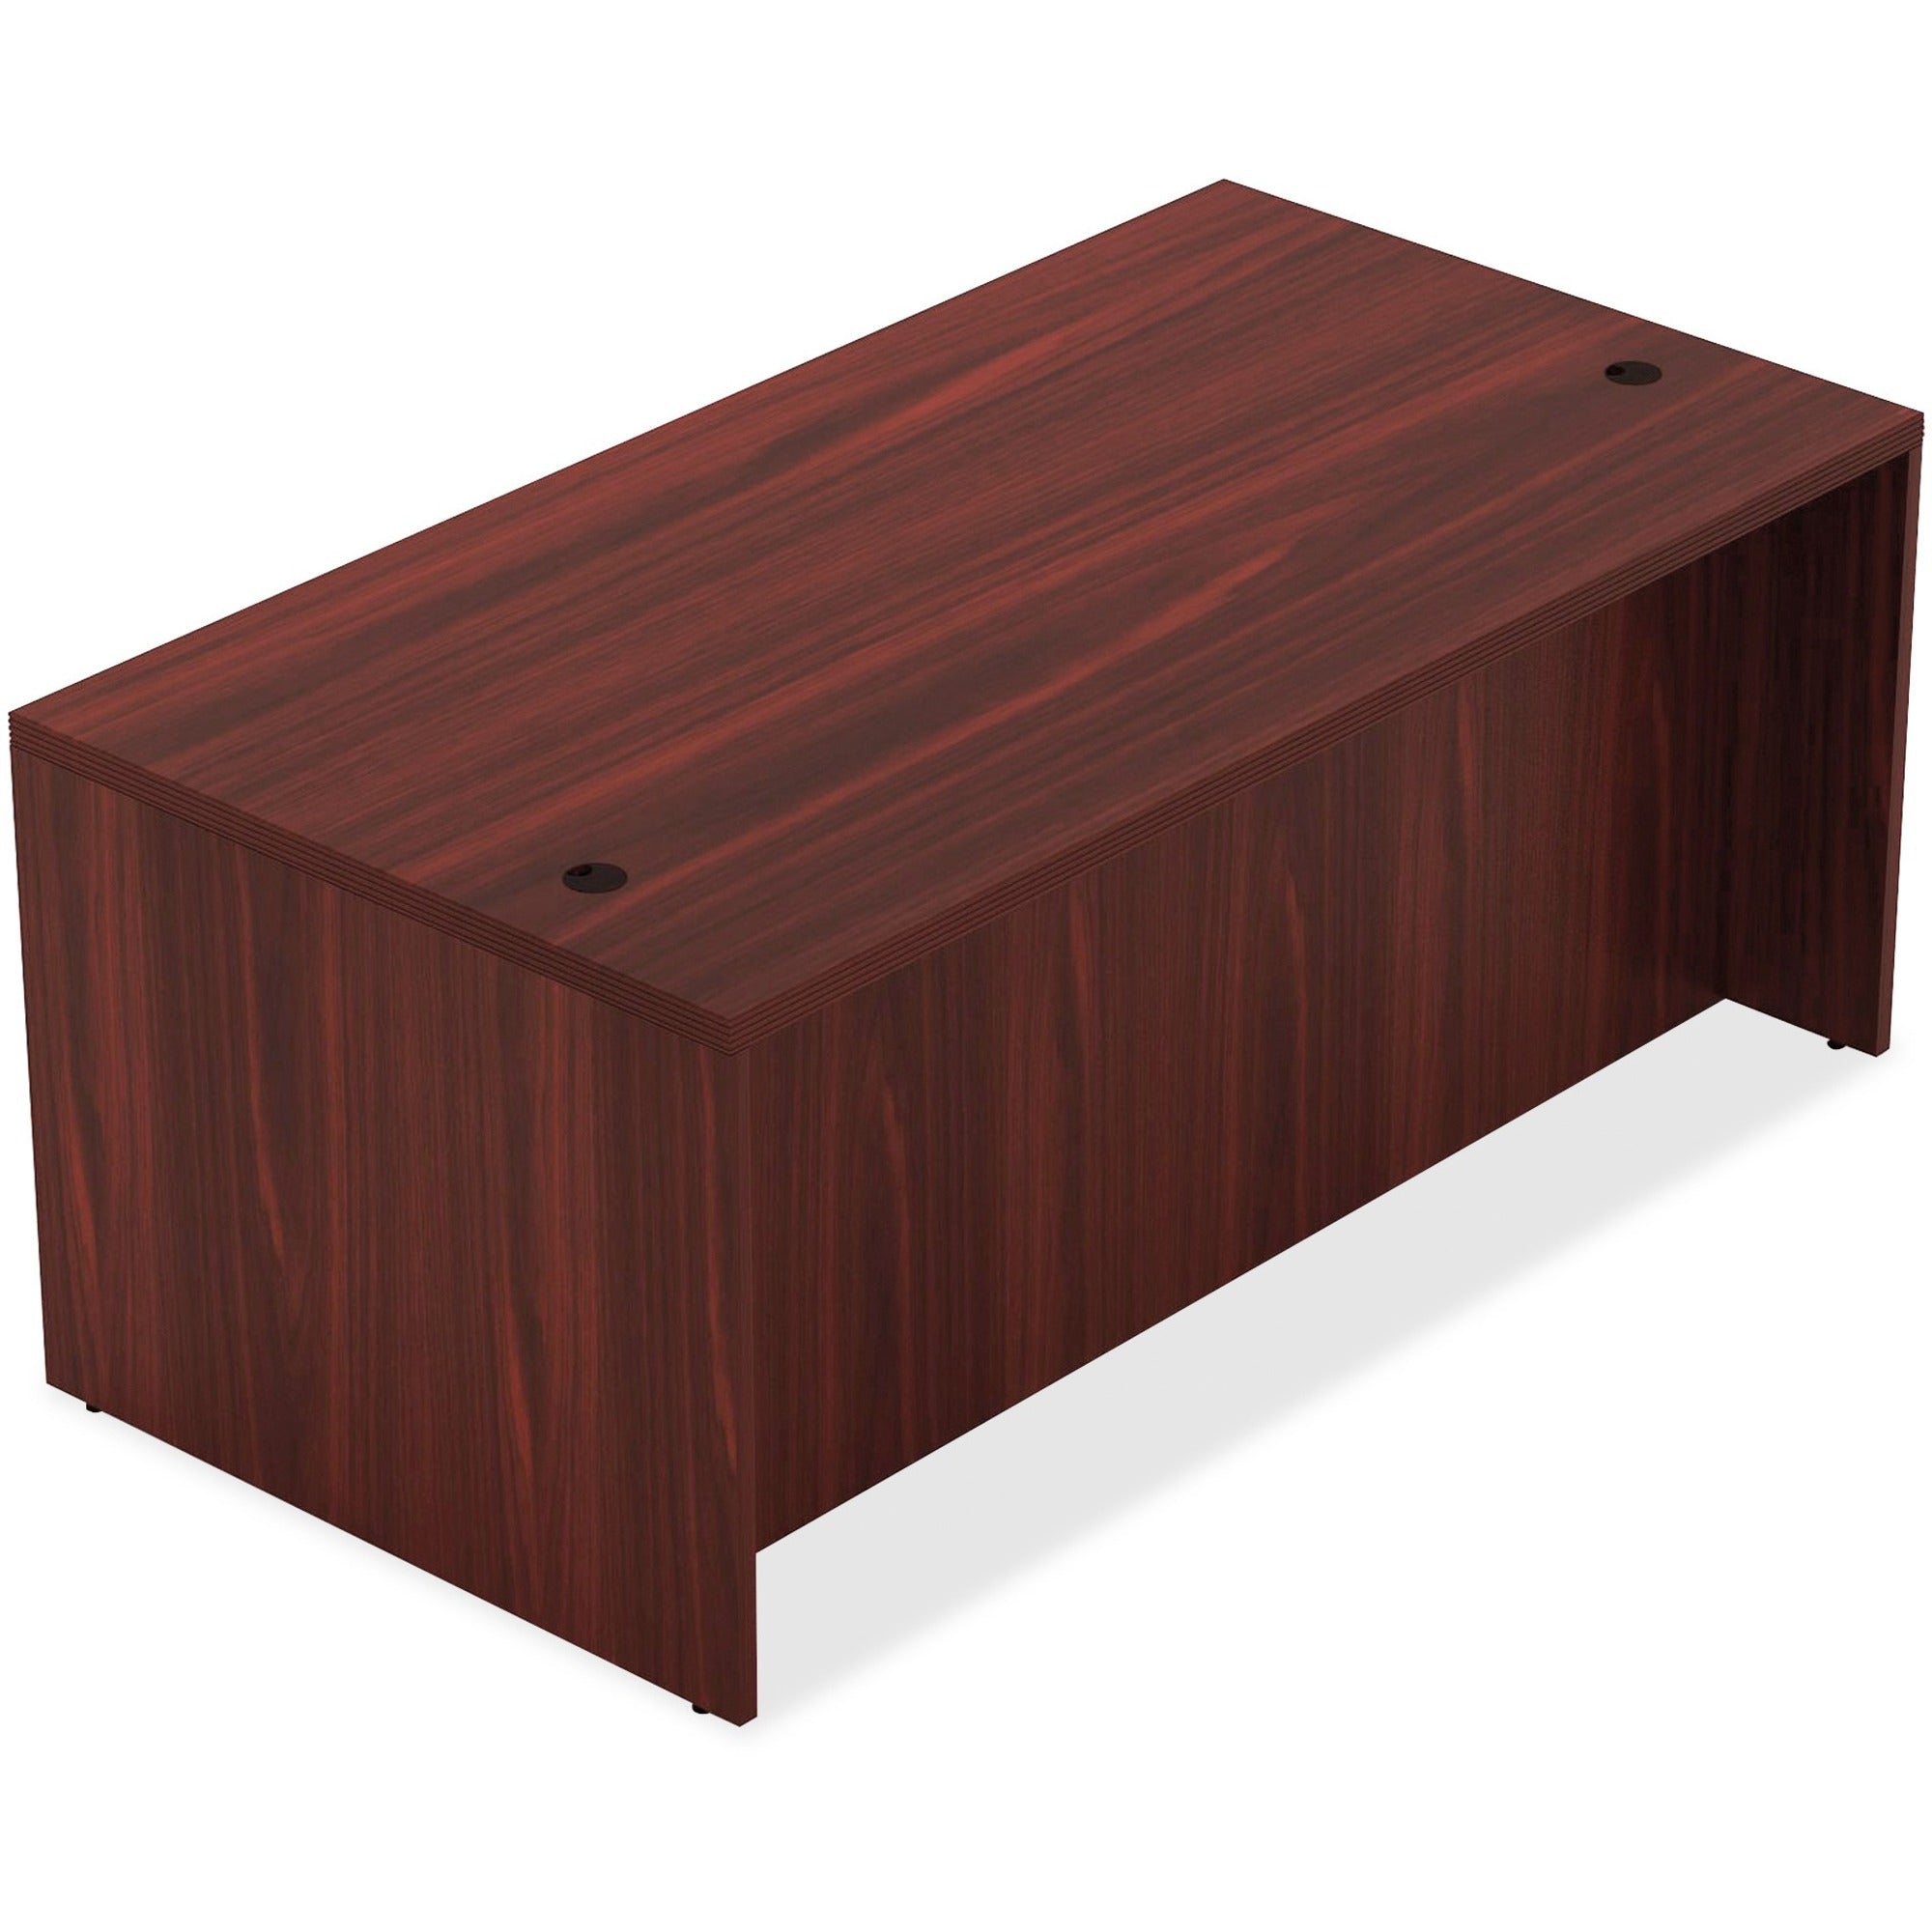 Lorell Chateau Series Rectangular desk - 70.9" x 35.4"30" Desk, 1.5" Top - Reeded Edge - Material: P2 Particleboard - Finish: Mahogany, Laminate - Durable, Modesty Panel, Grommet, Cord Management - For Office - 